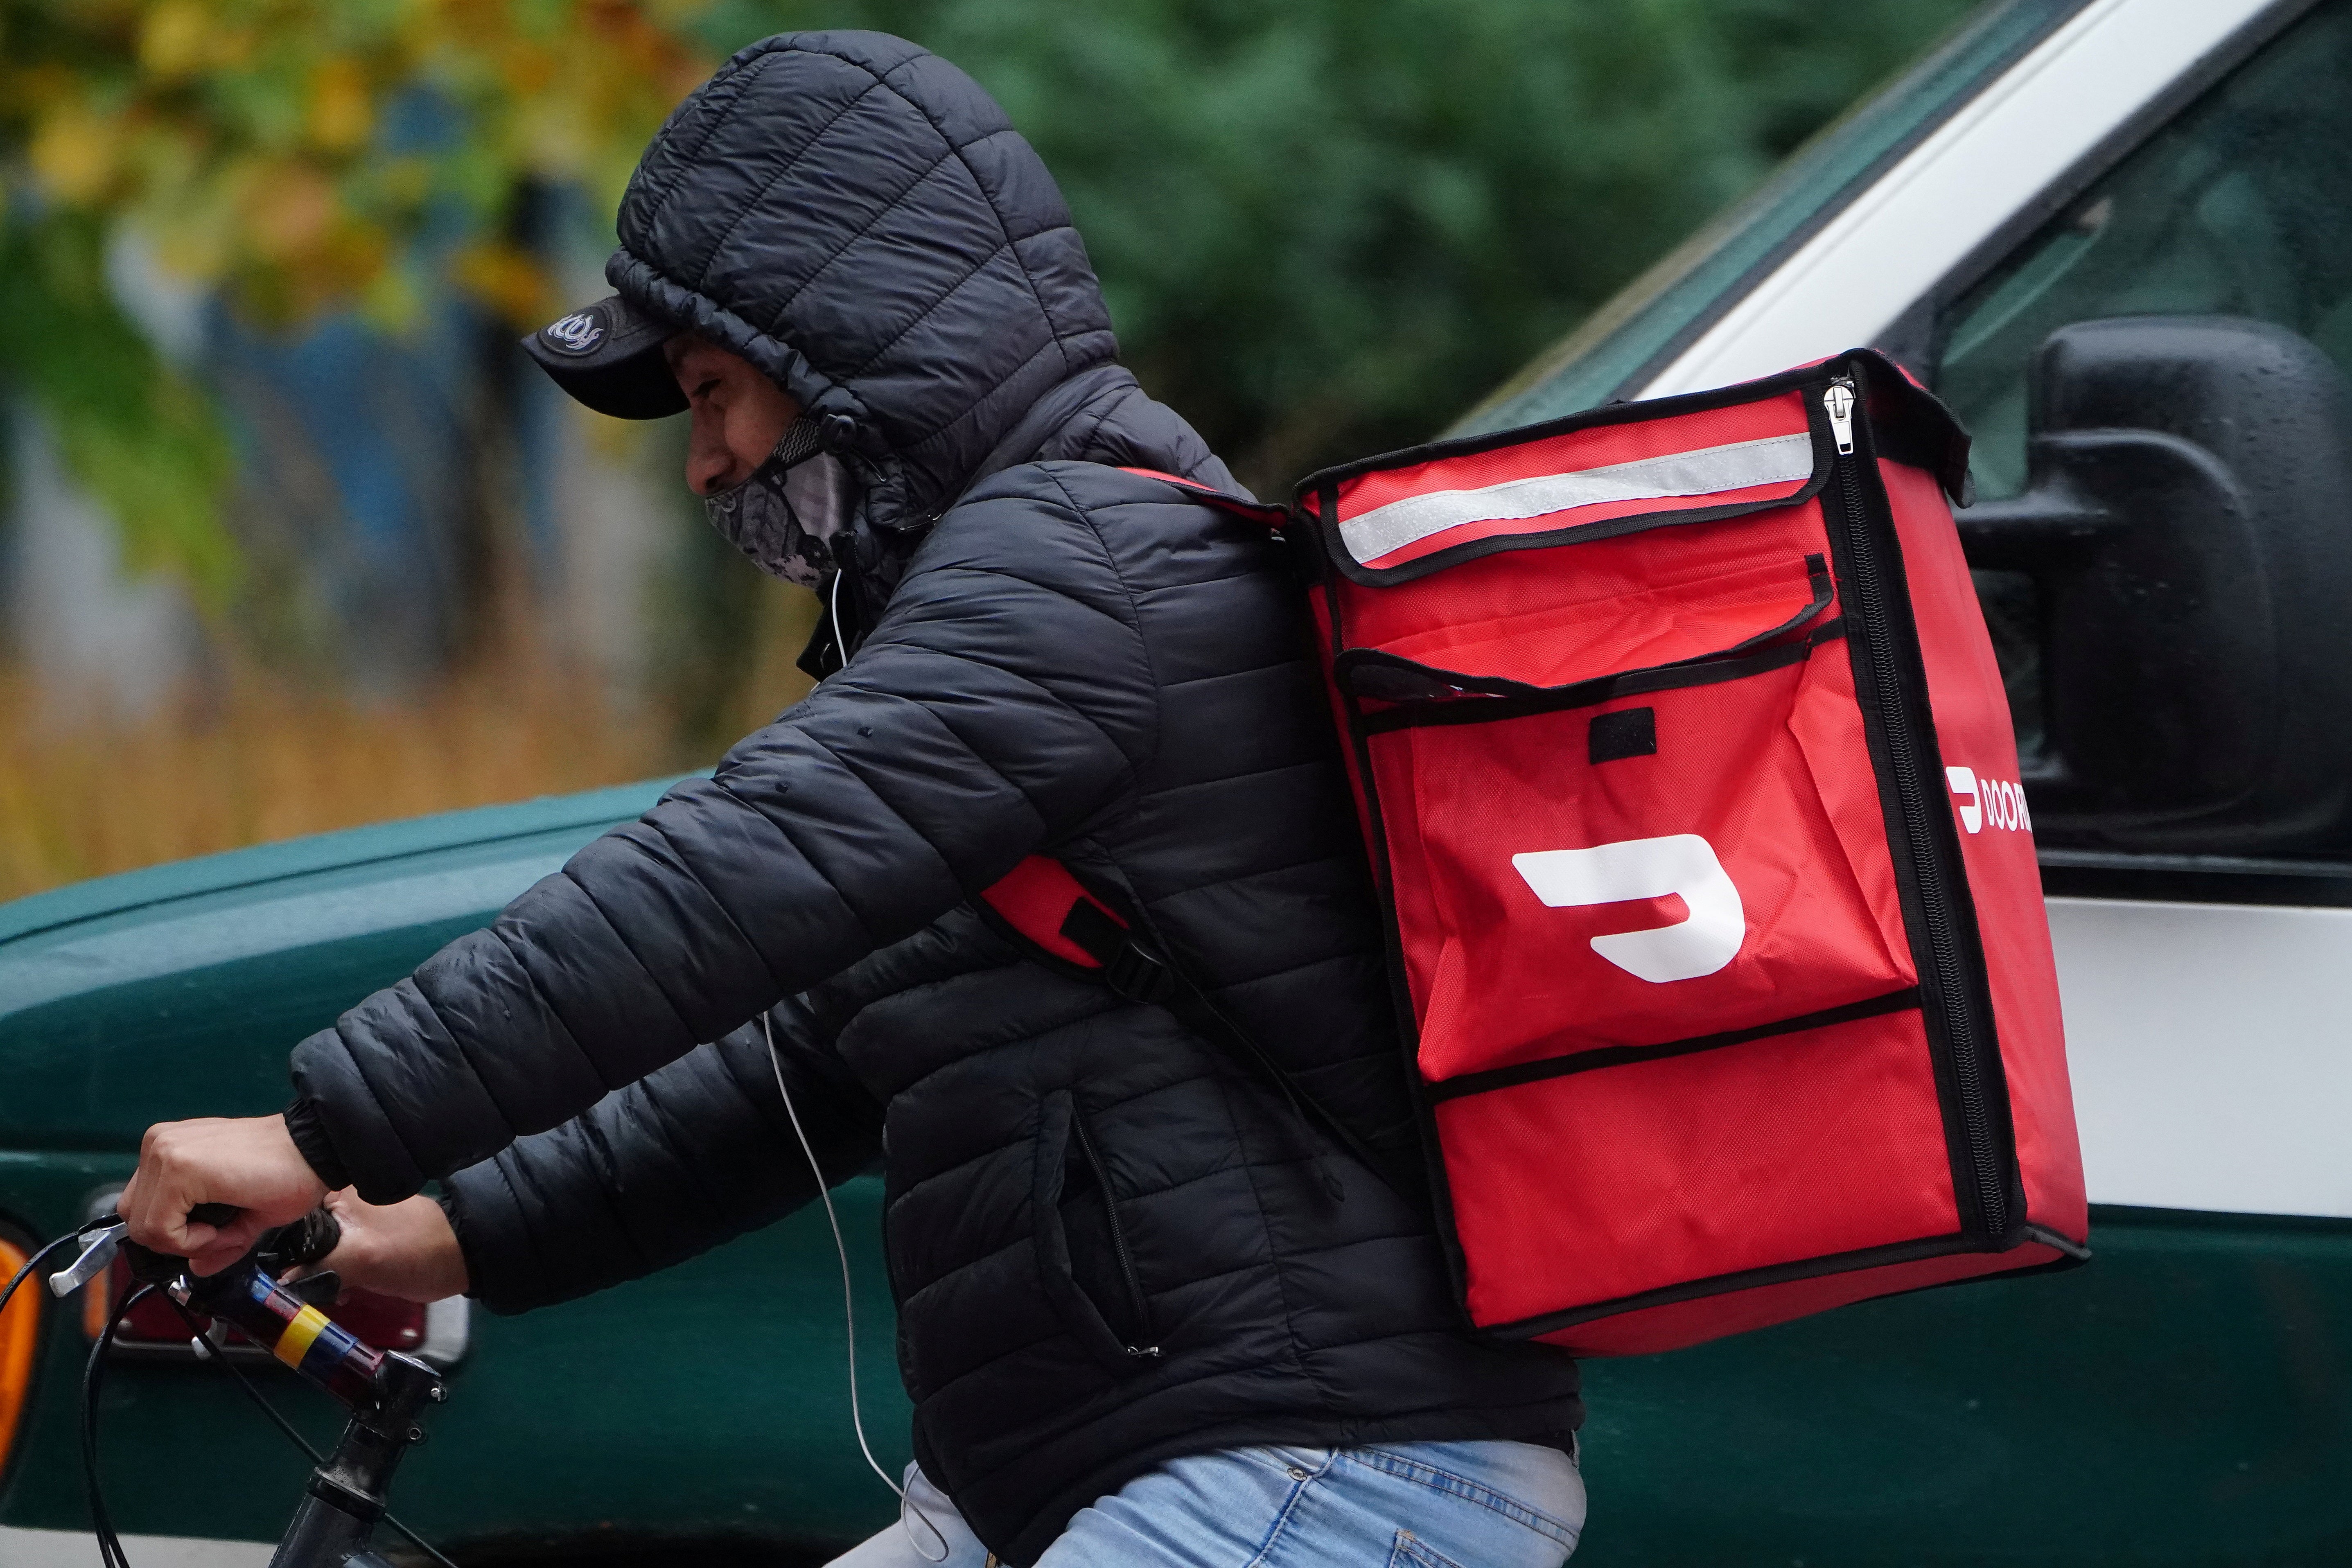 Gig Companies Like Uber Always Say They Can’t Pay Delivery Workers More. Here’s the Truth. Terri Gerstein